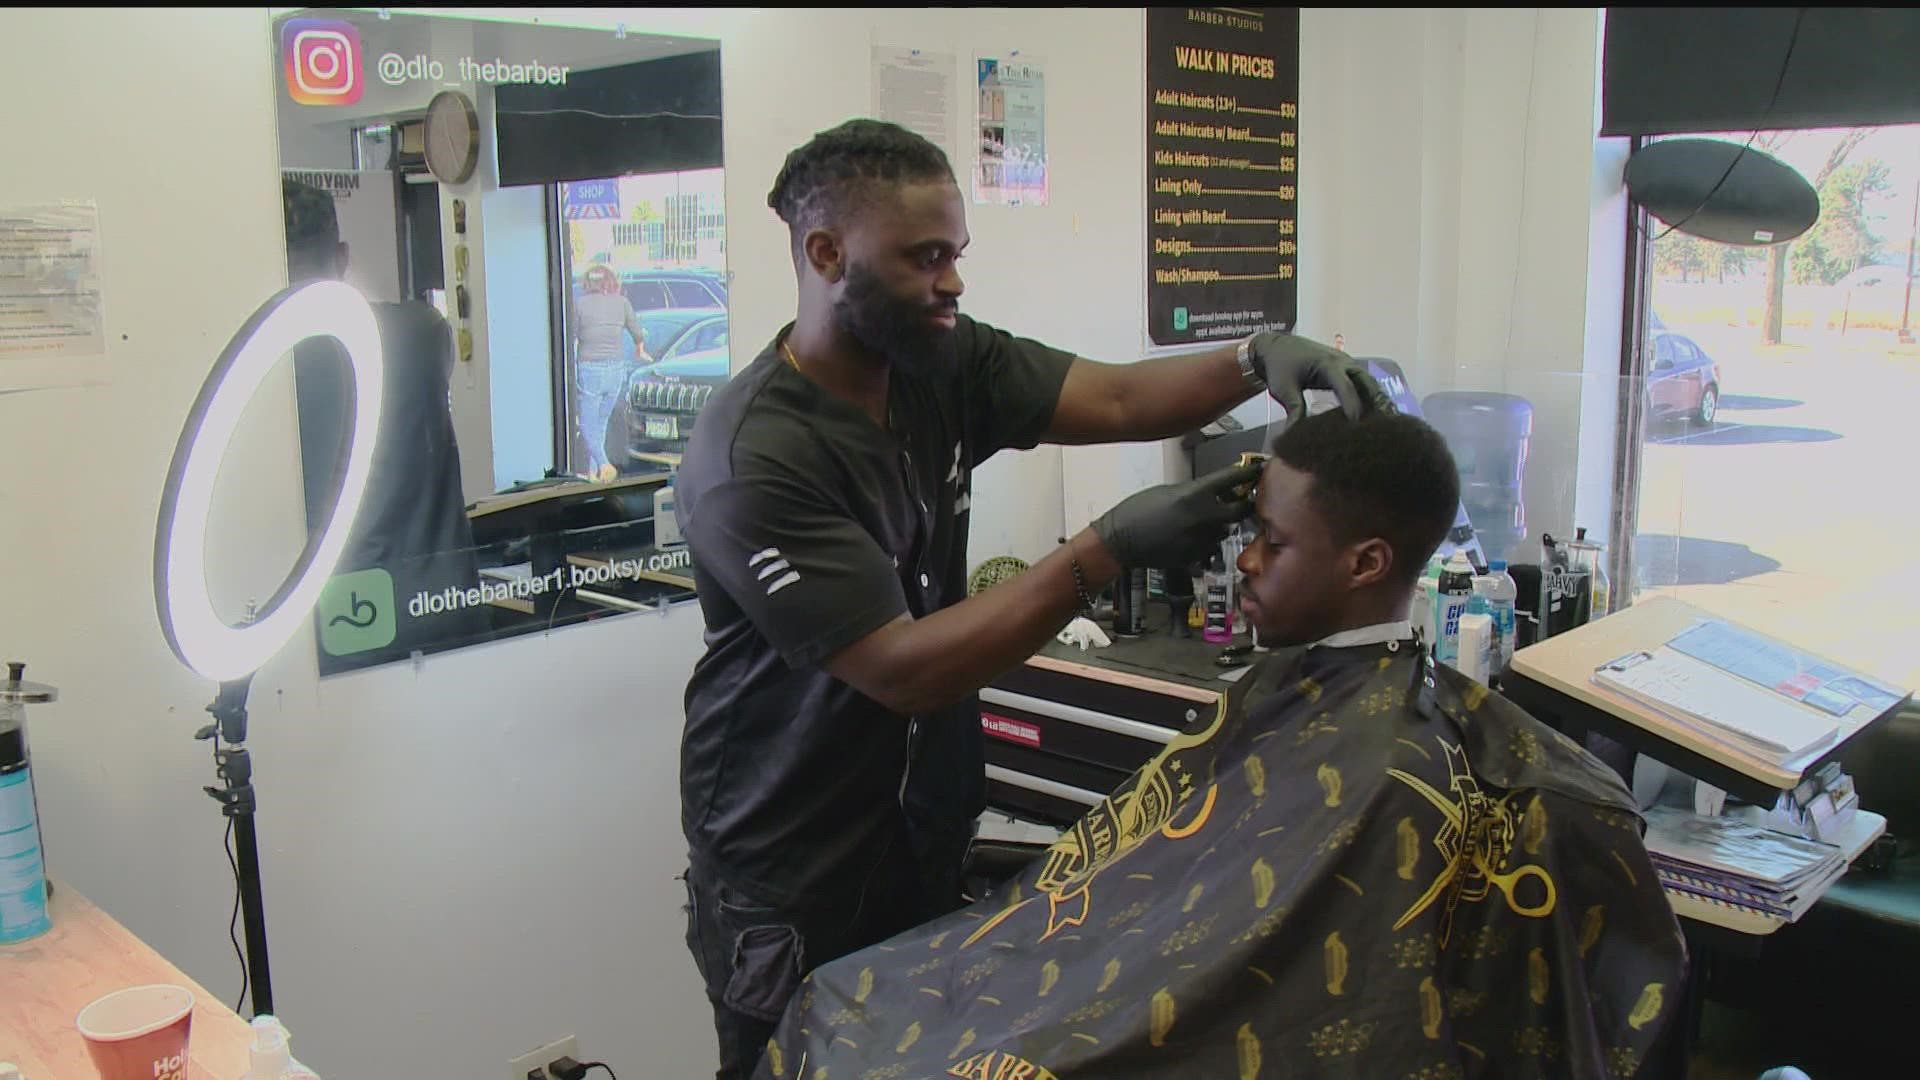 Entrepreneur barber Henry Tribes has barber shop locations in Minnesota as well as D.C.